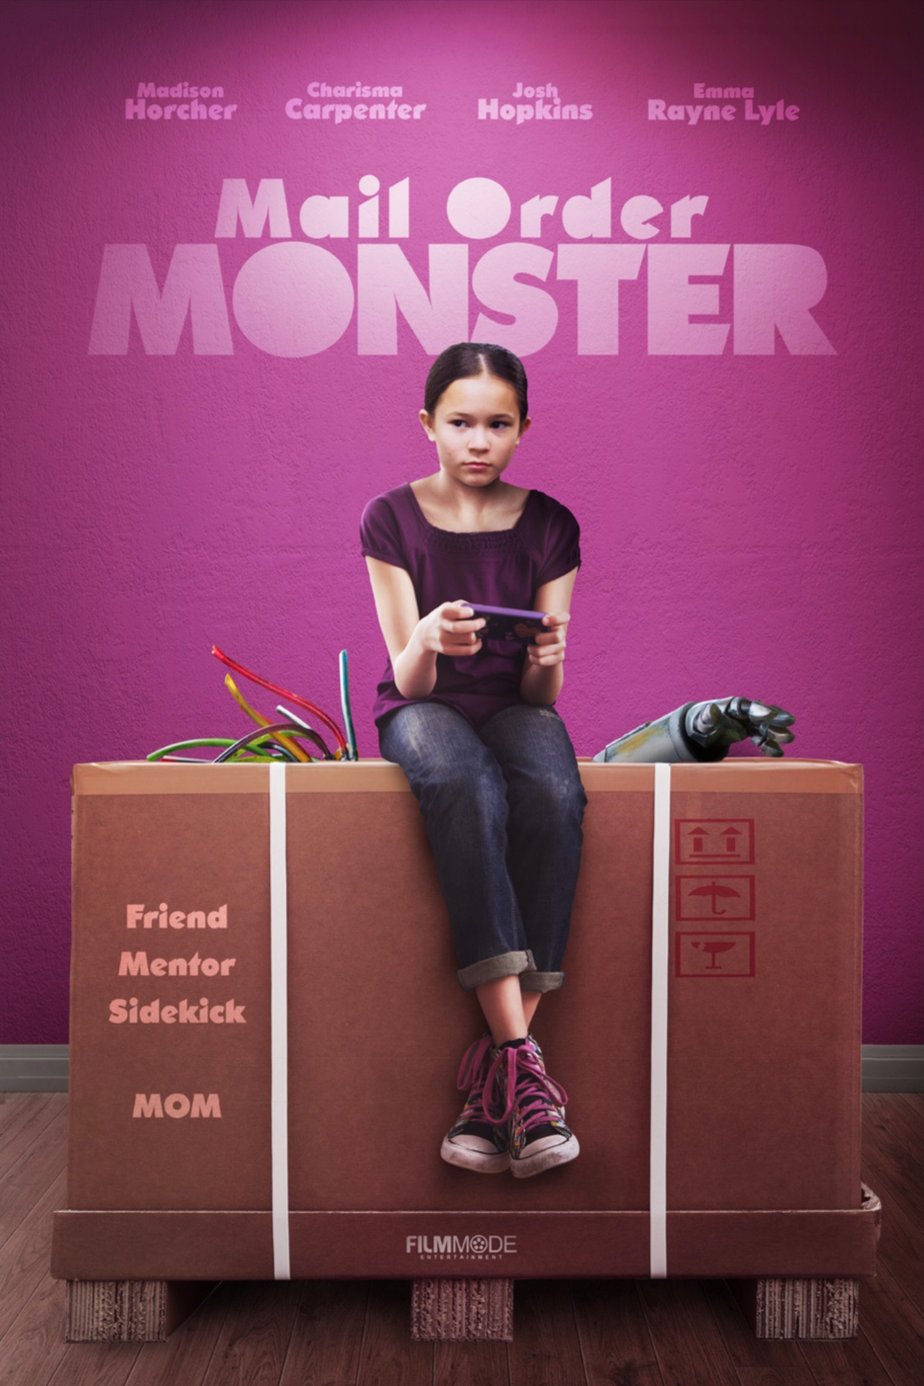 Poster of the movie Mail Order Monster